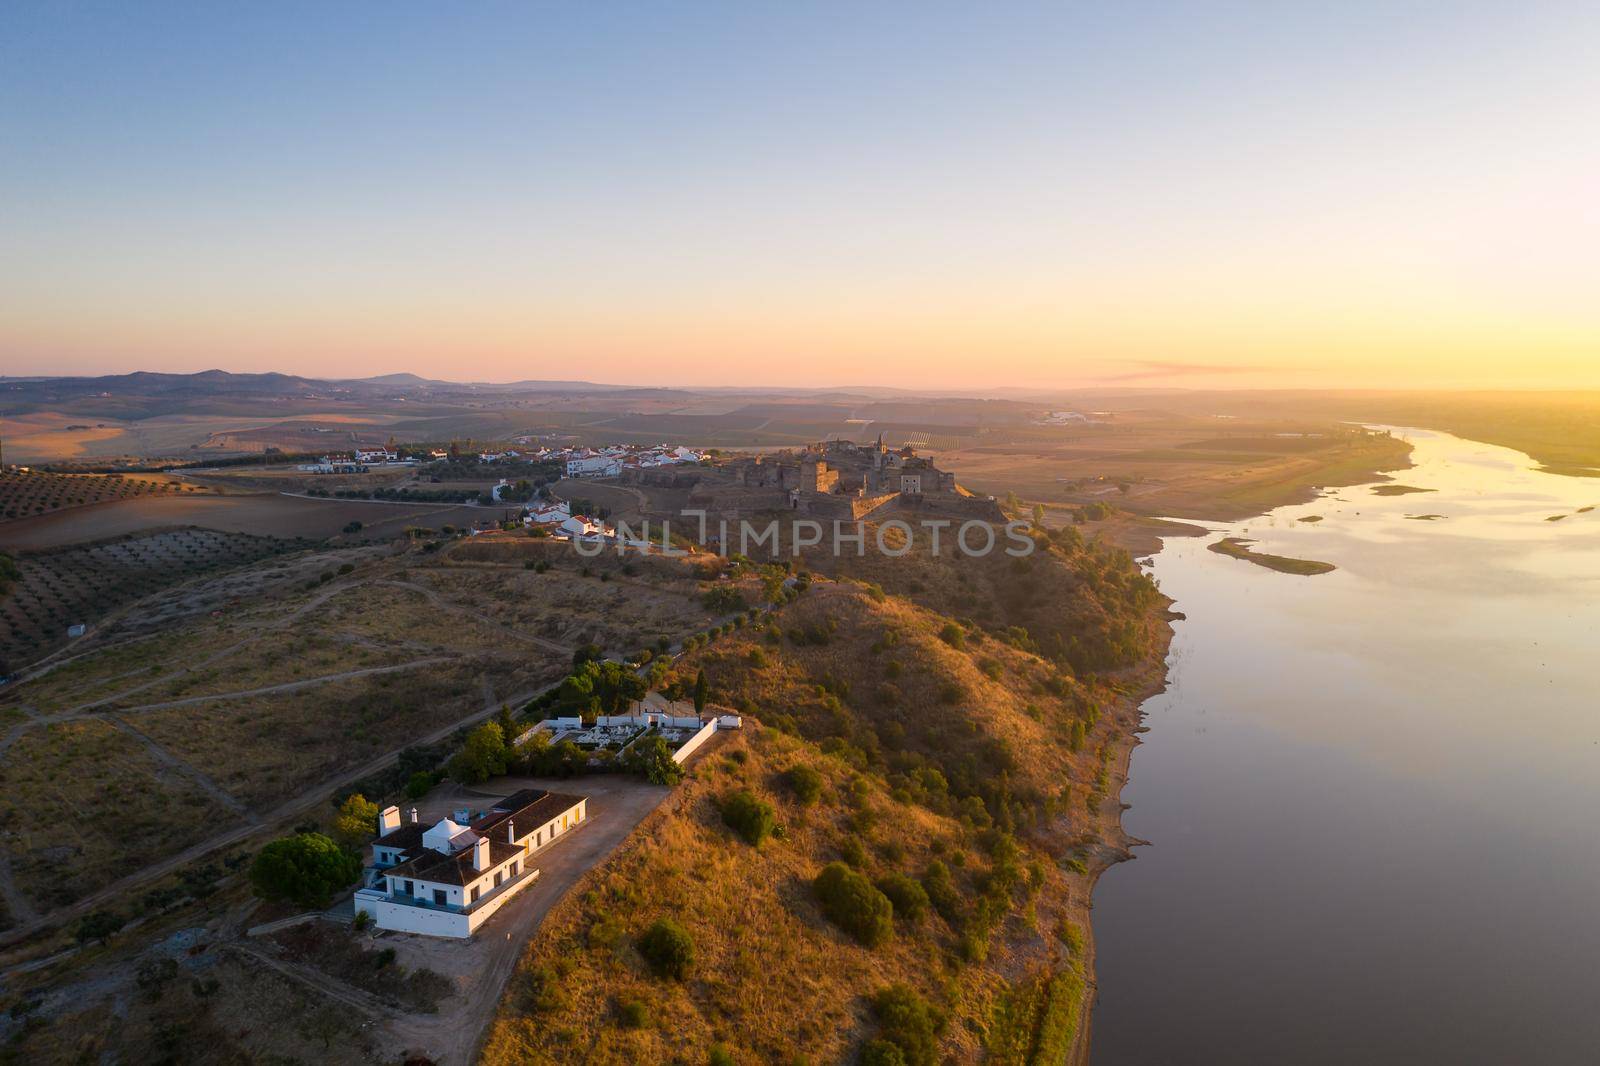 Juromenha castle, village and Guadiana river drone aerial view at sunrise in Alentejo, Portugal by Luispinaphotography